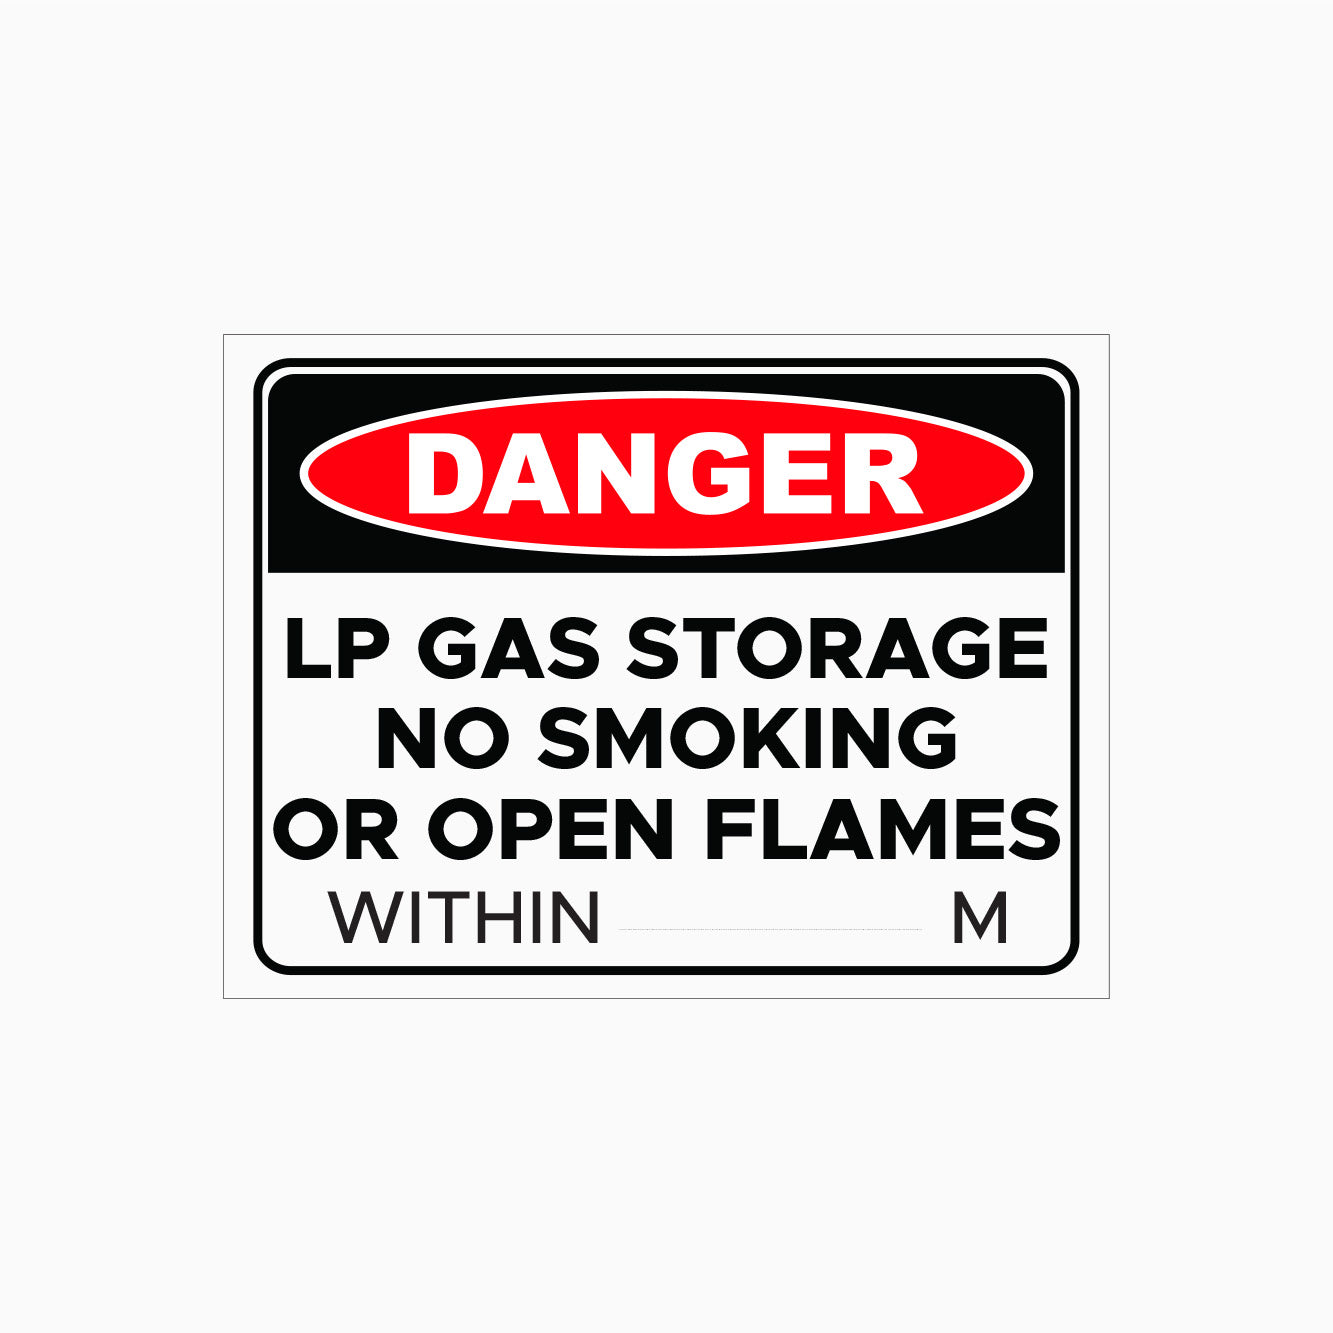 LP GAS STORAGE - NO SMOKING OR OPEN FLAMES WITHIN ......M SIGN - DANGER SIGN